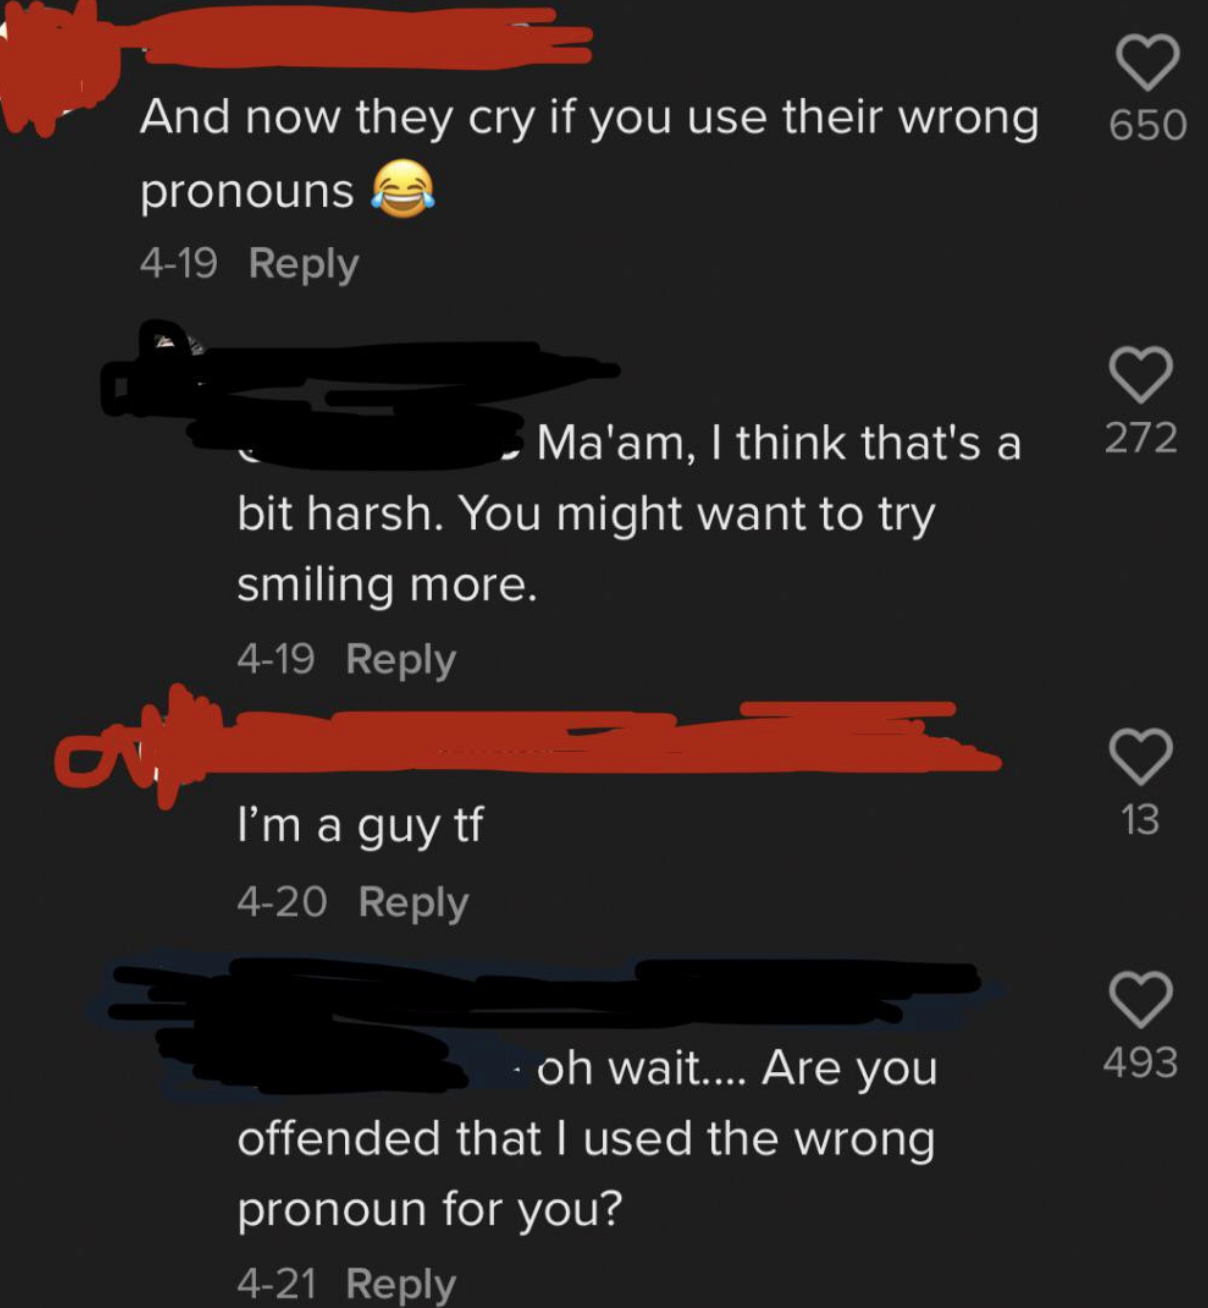 &quot;Are you offended that I used the wrong pronoun for you?&quot;